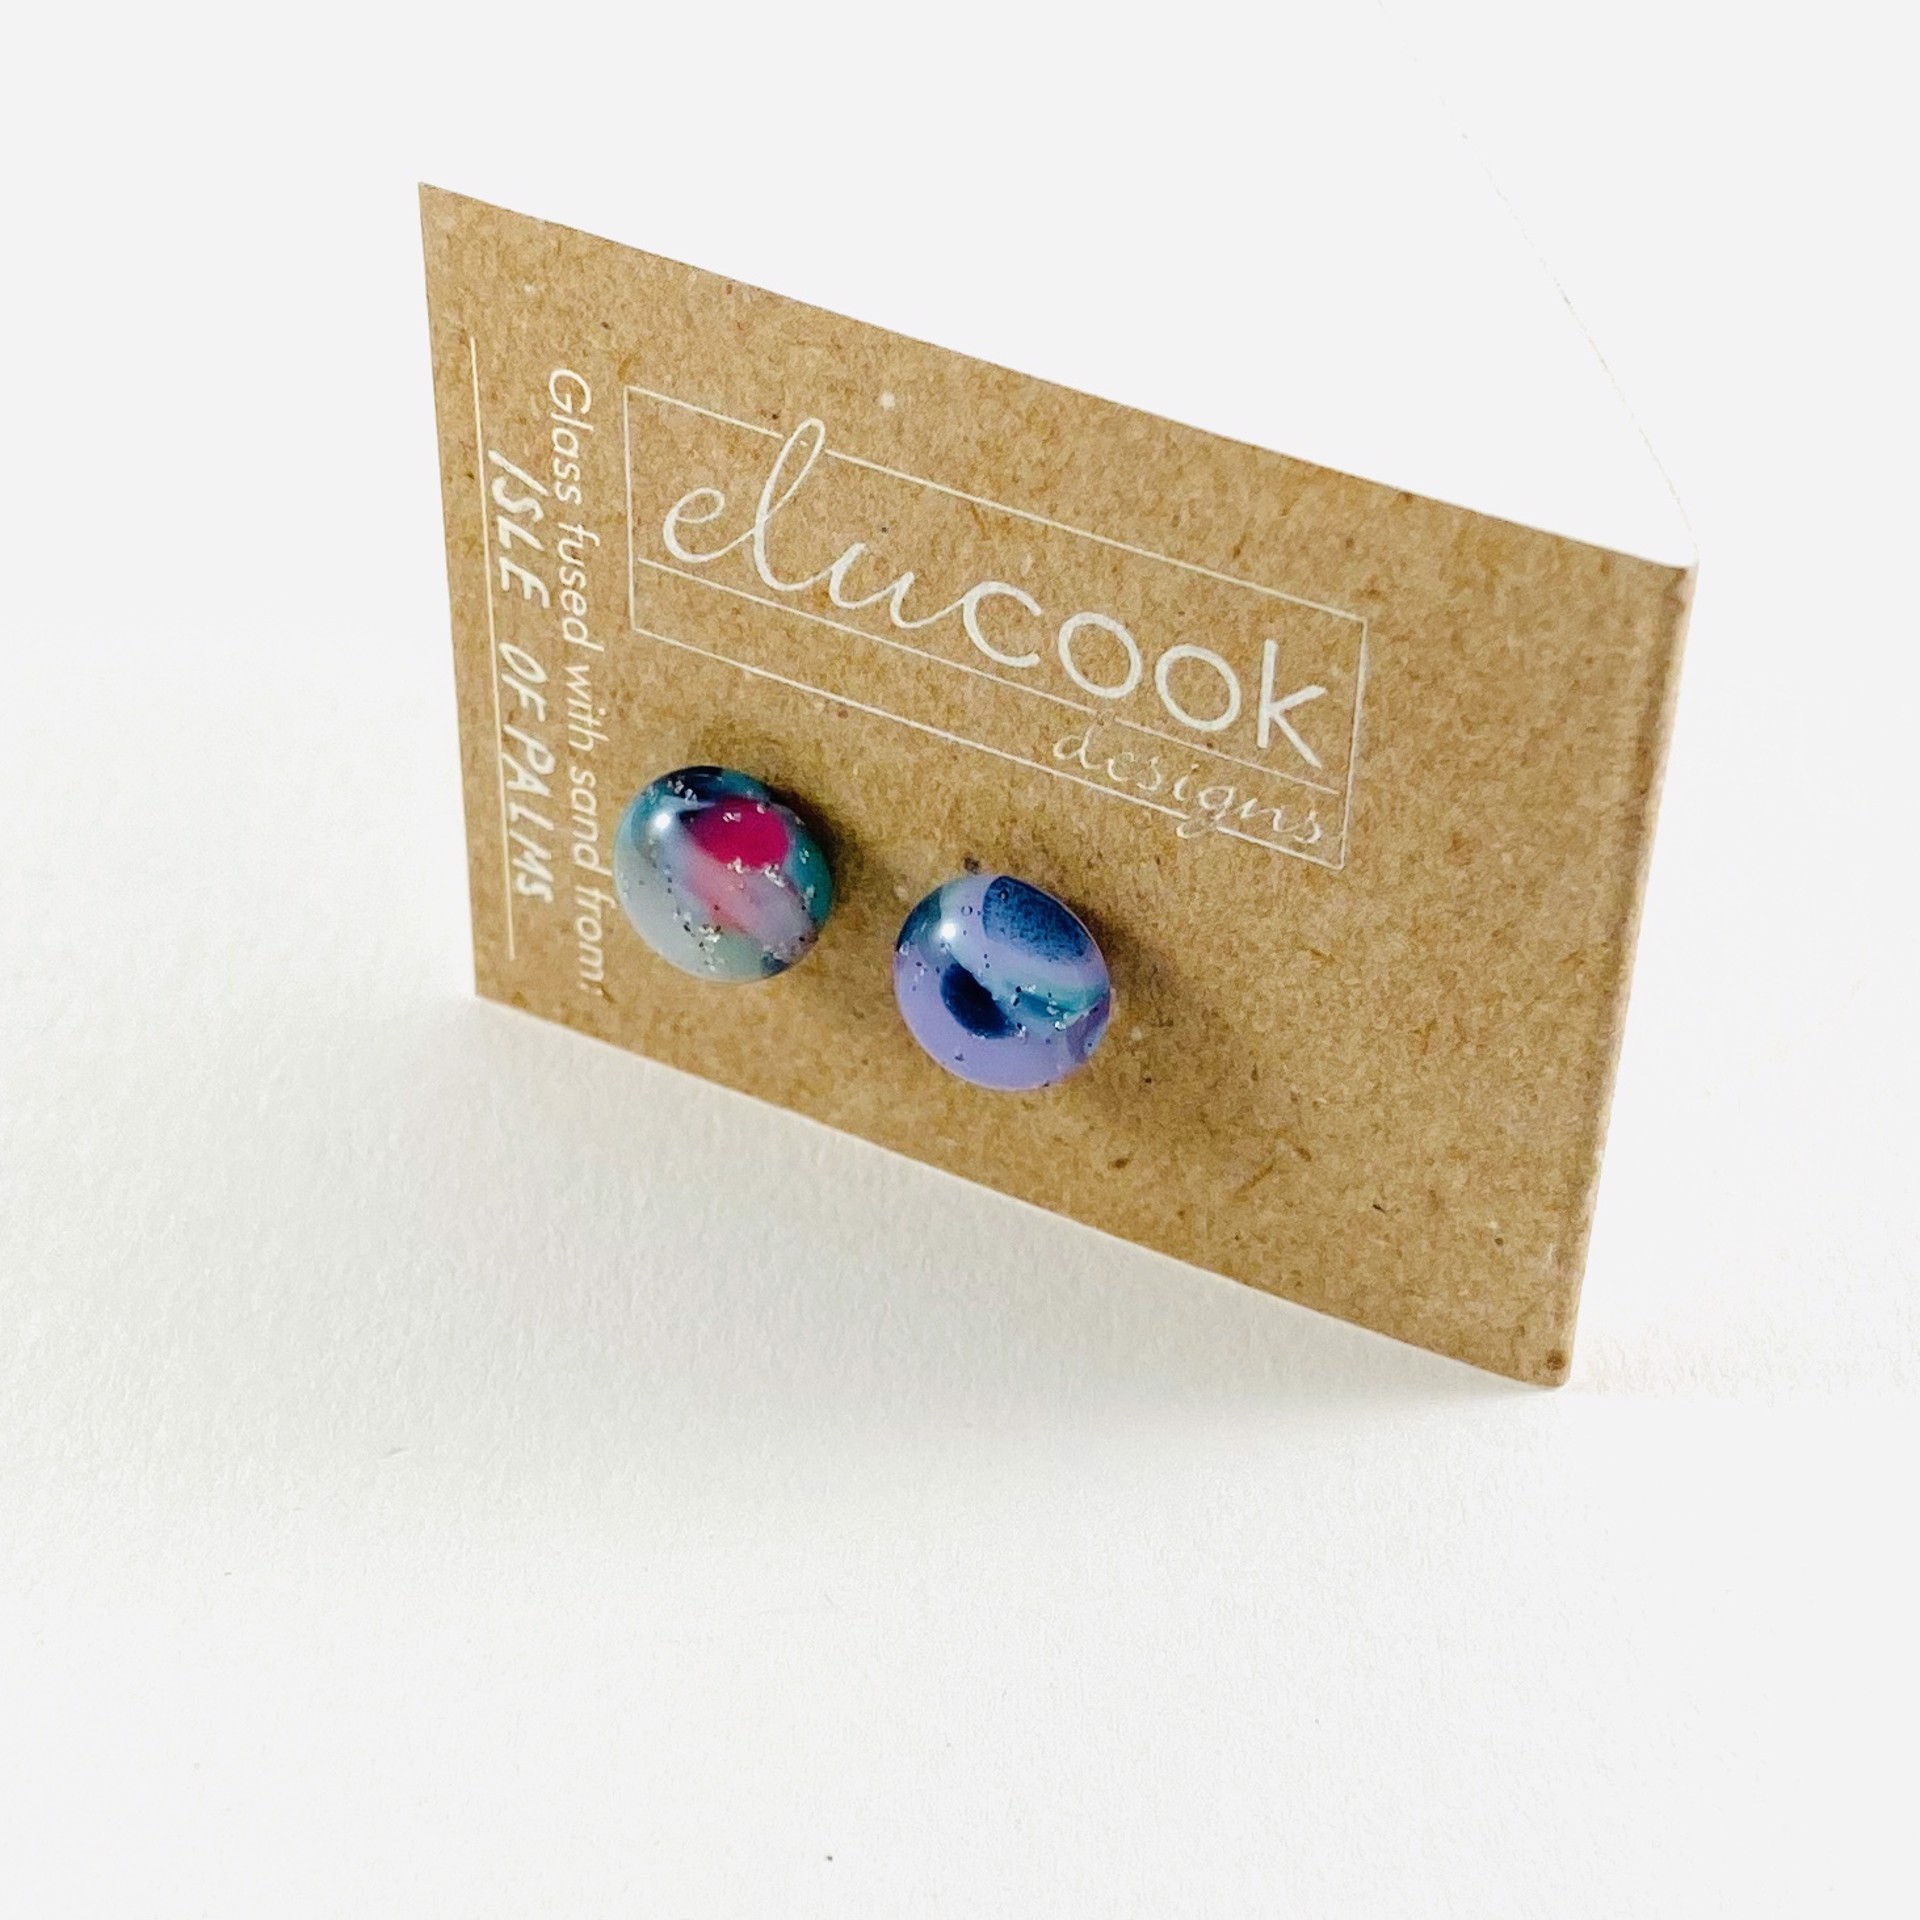 Button Earrings, 8p by Emily Cook